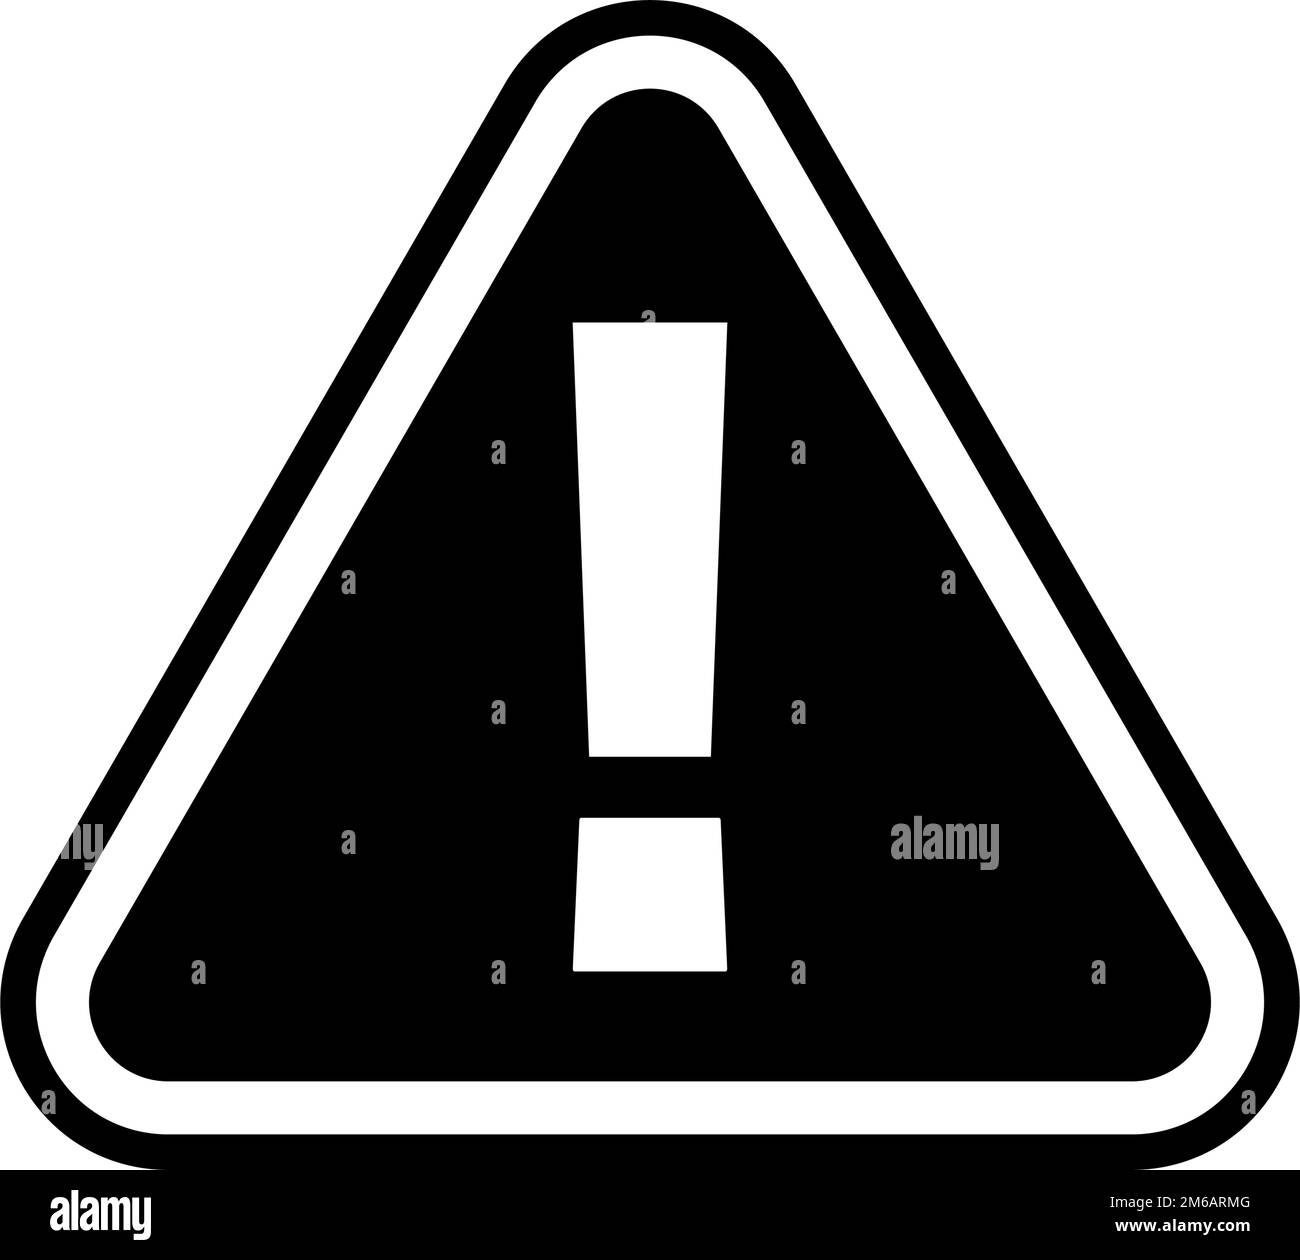 Triangular warning symbol. Silhouette icon of exclamation. Caution or danger. Editable vector. Stock Vector